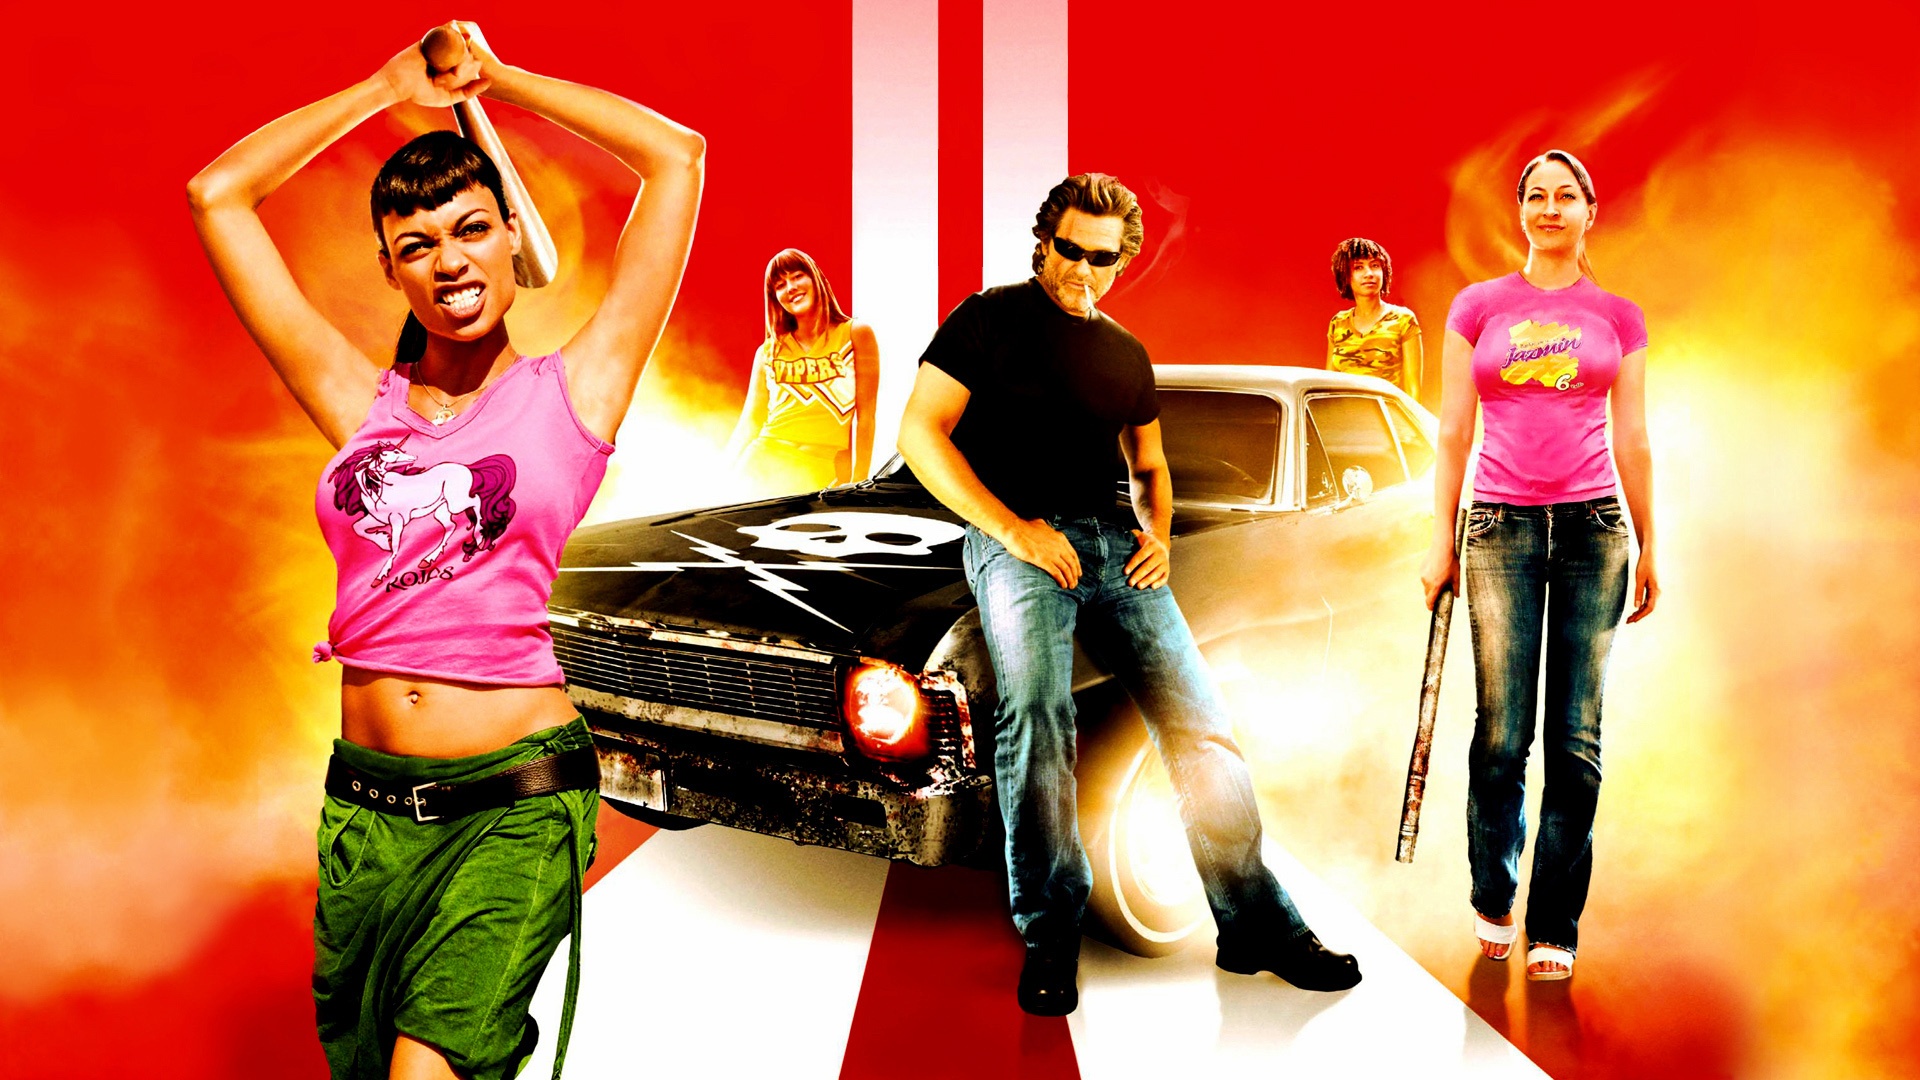 Death Proof Image - Death Proof 2007 Movie Posters , HD Wallpaper & Backgrounds